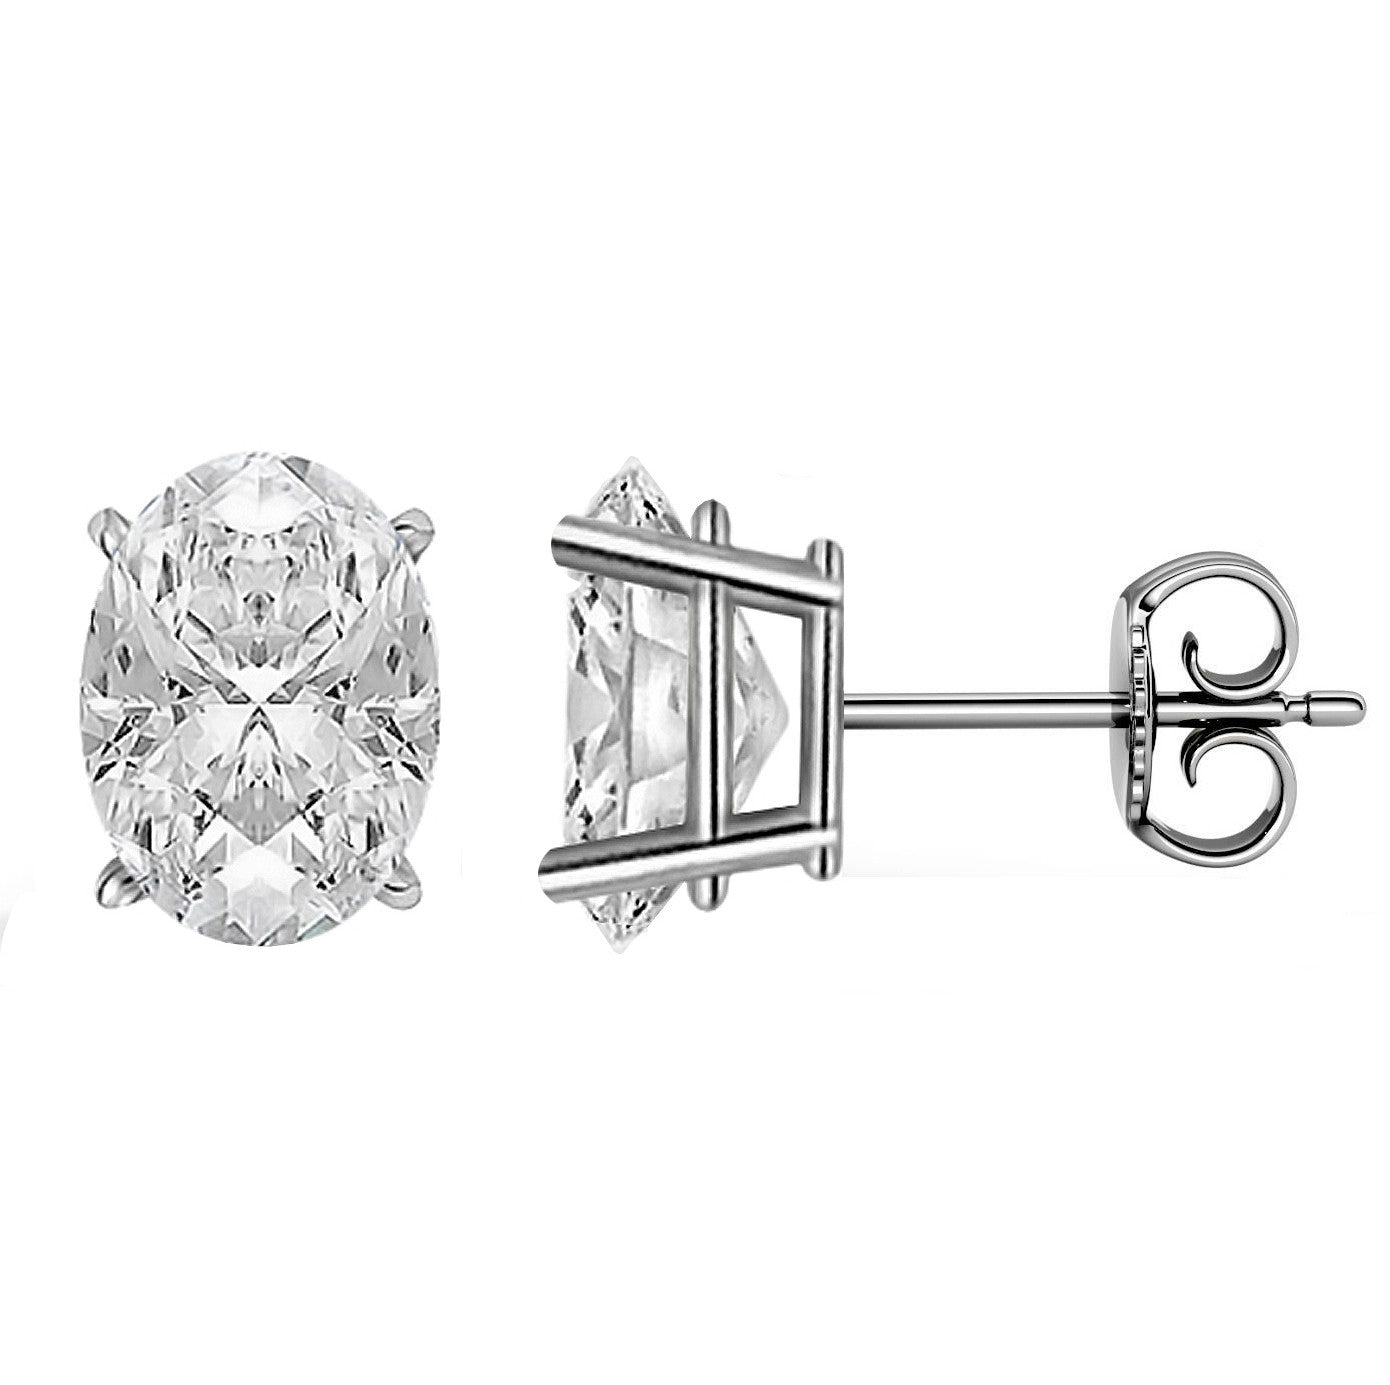 Platinum 4-Prong Basket Push Back Oval Stud Earrings.  Available From .25 Carat To 10 Carat.